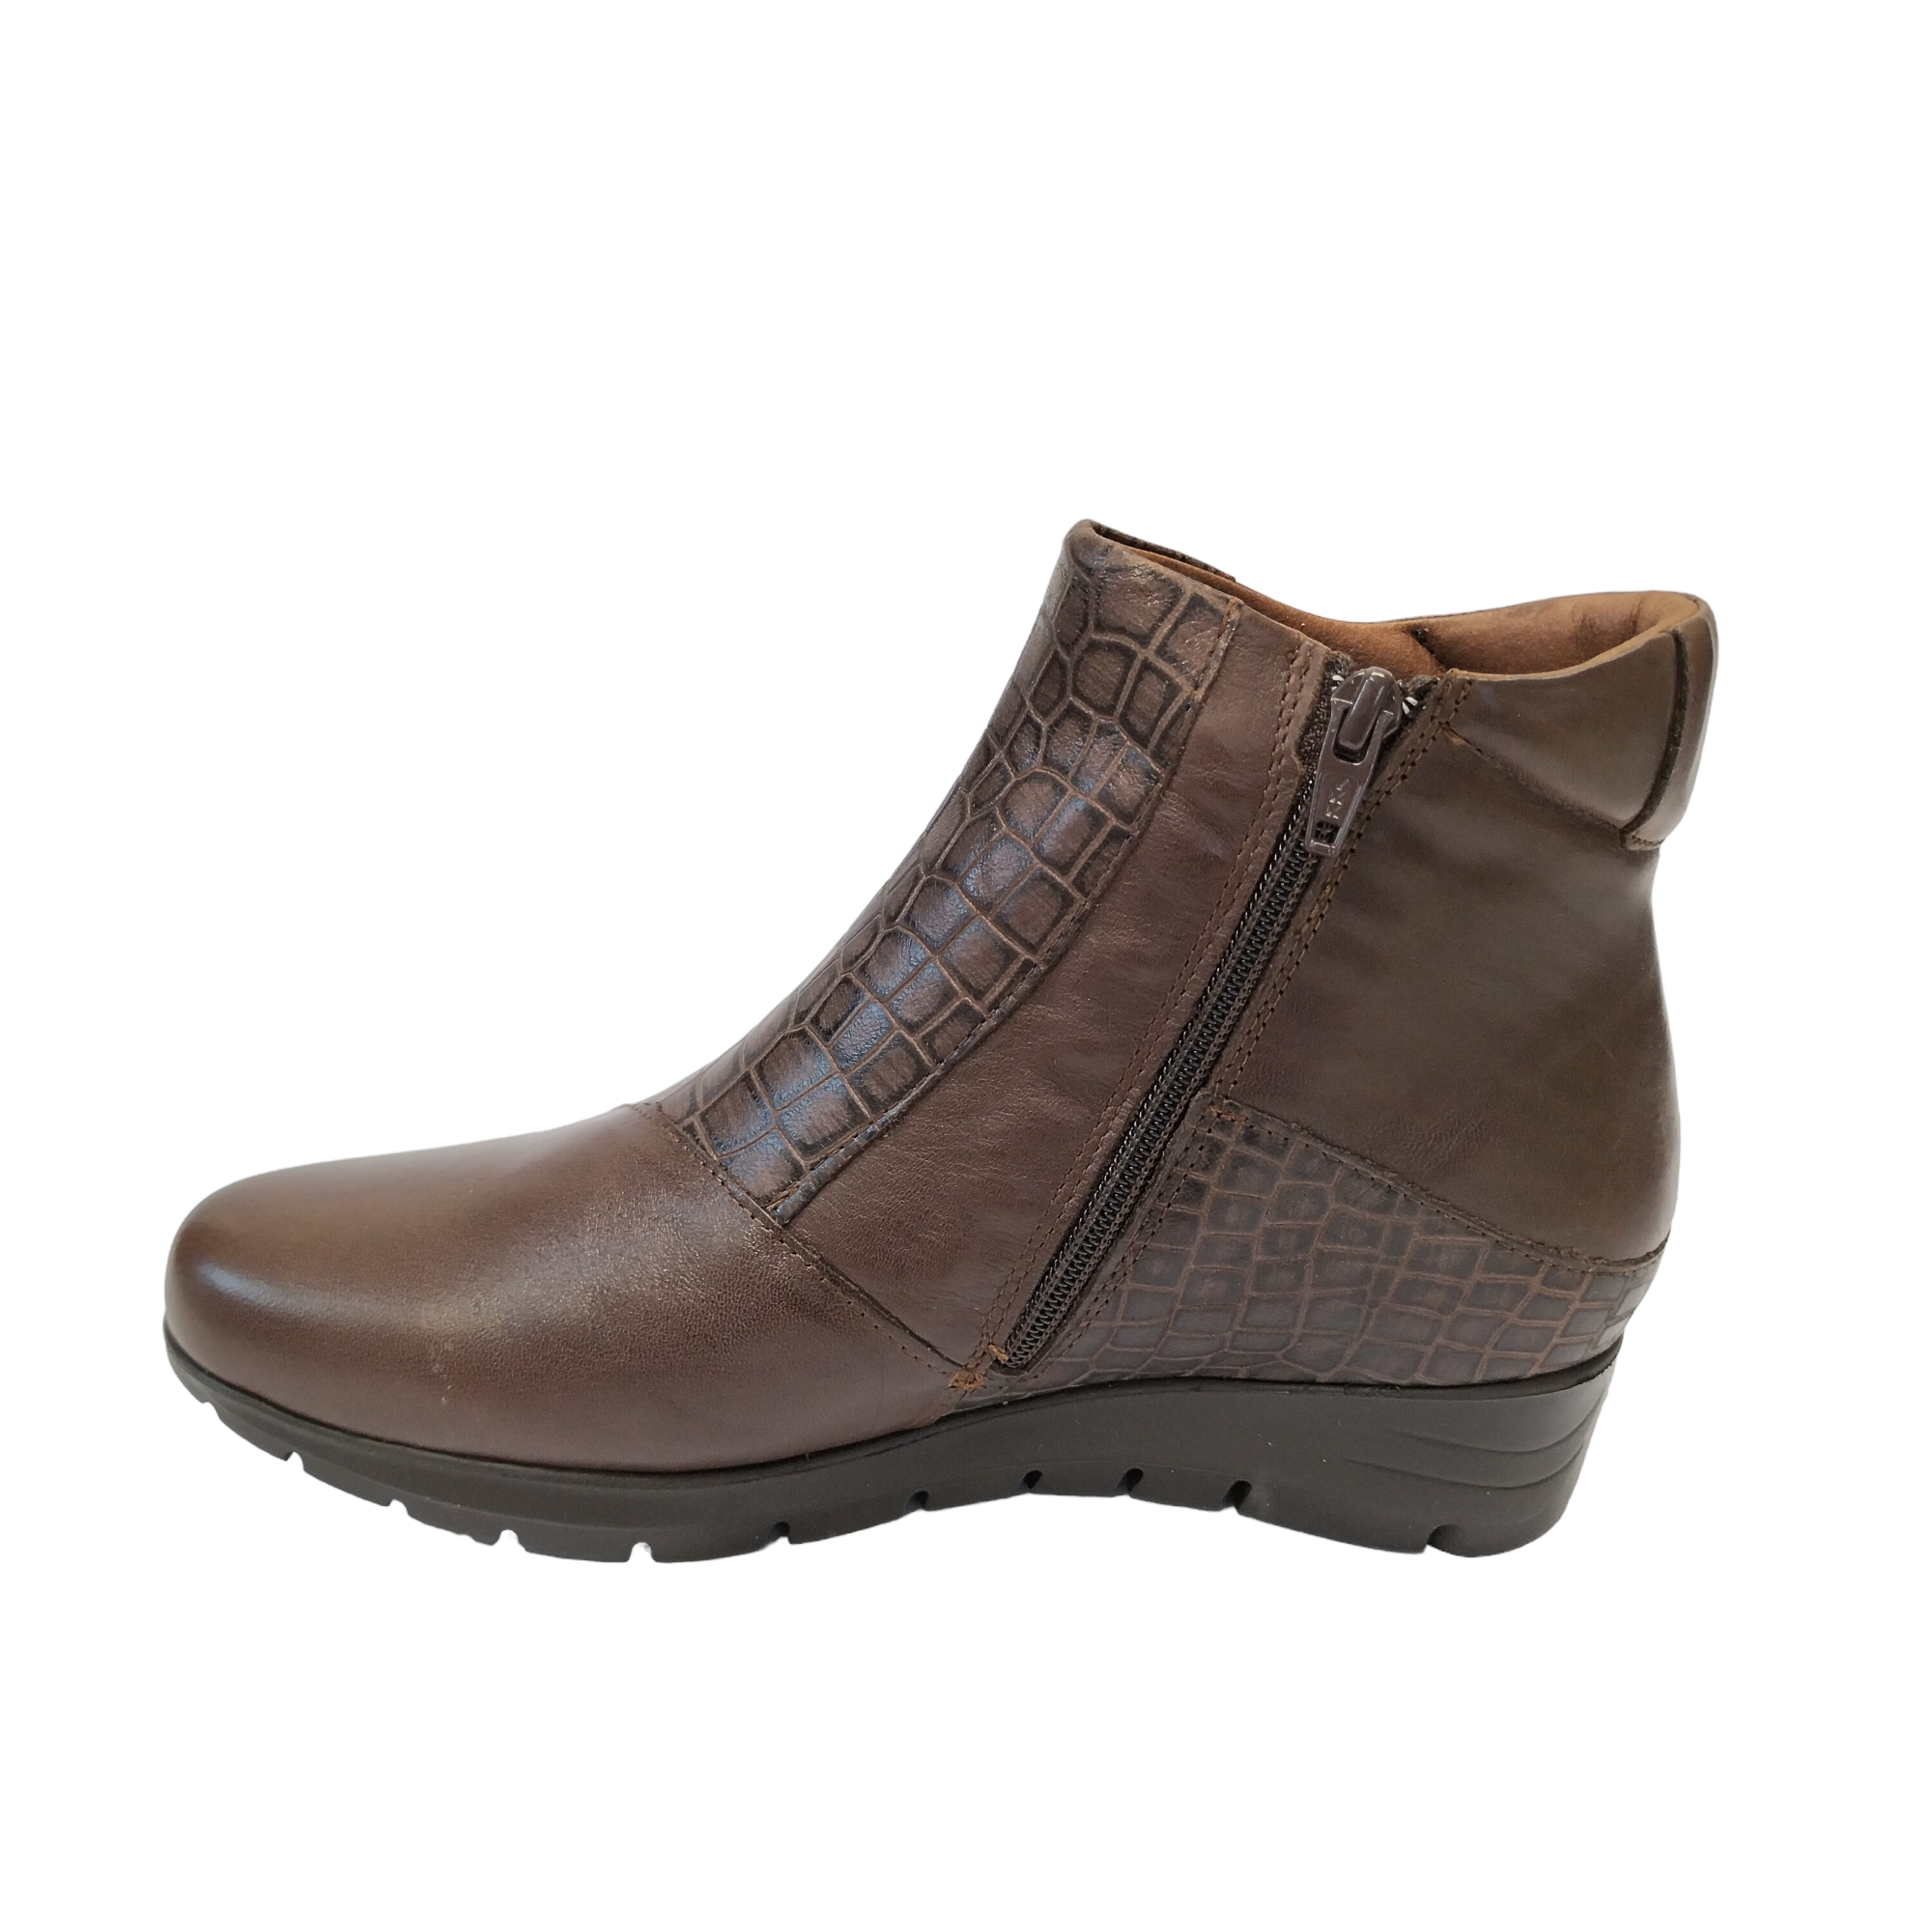 PI 2501 - shoe&amp;me - Pitillos - Boot - Boots, Winter, Womens